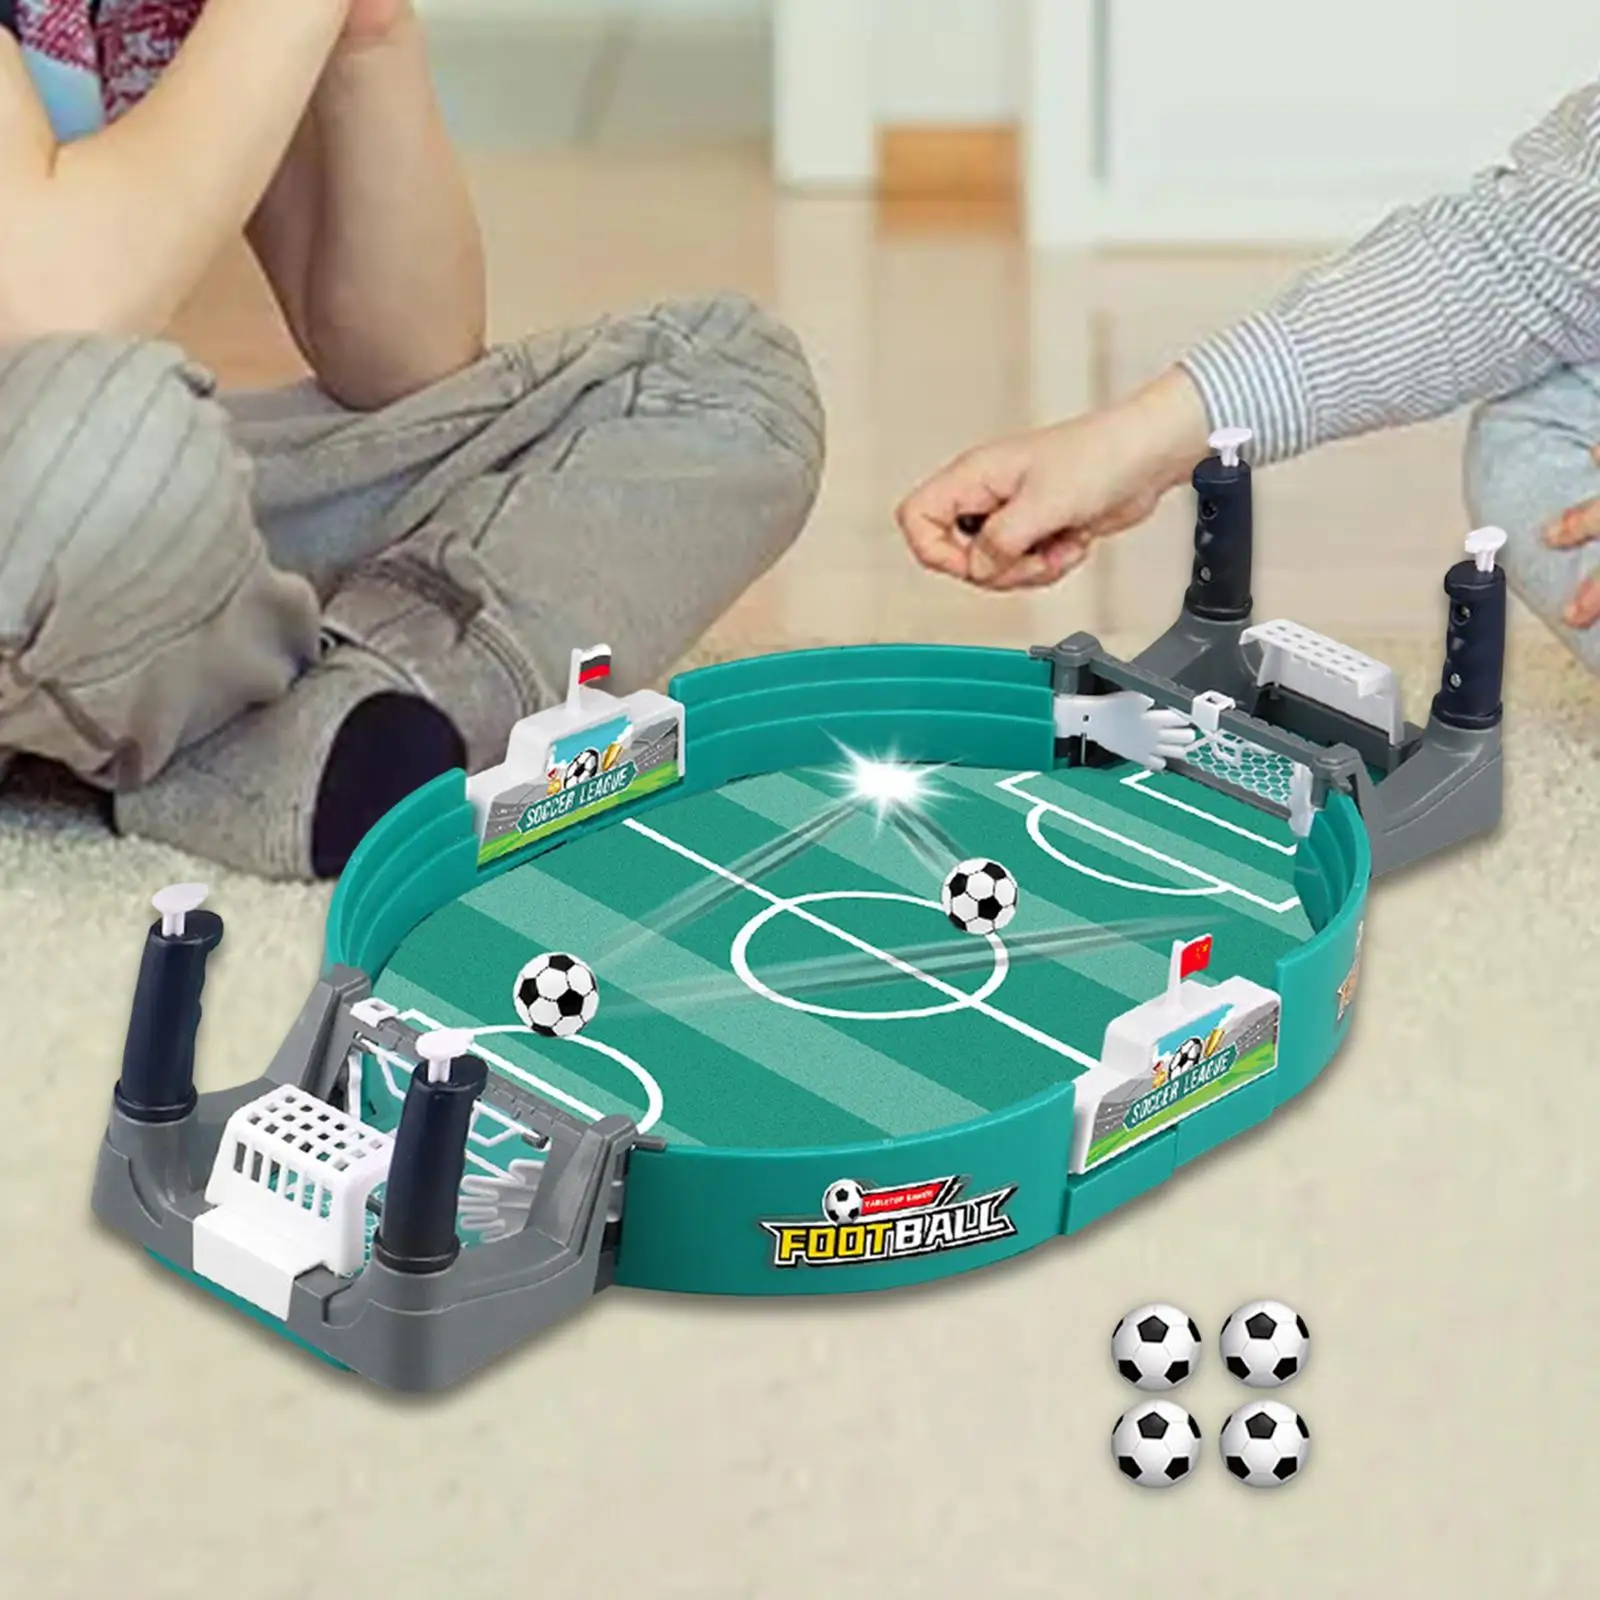 Mini Soccer Football Games Arcade Style for Parties All Ages Children